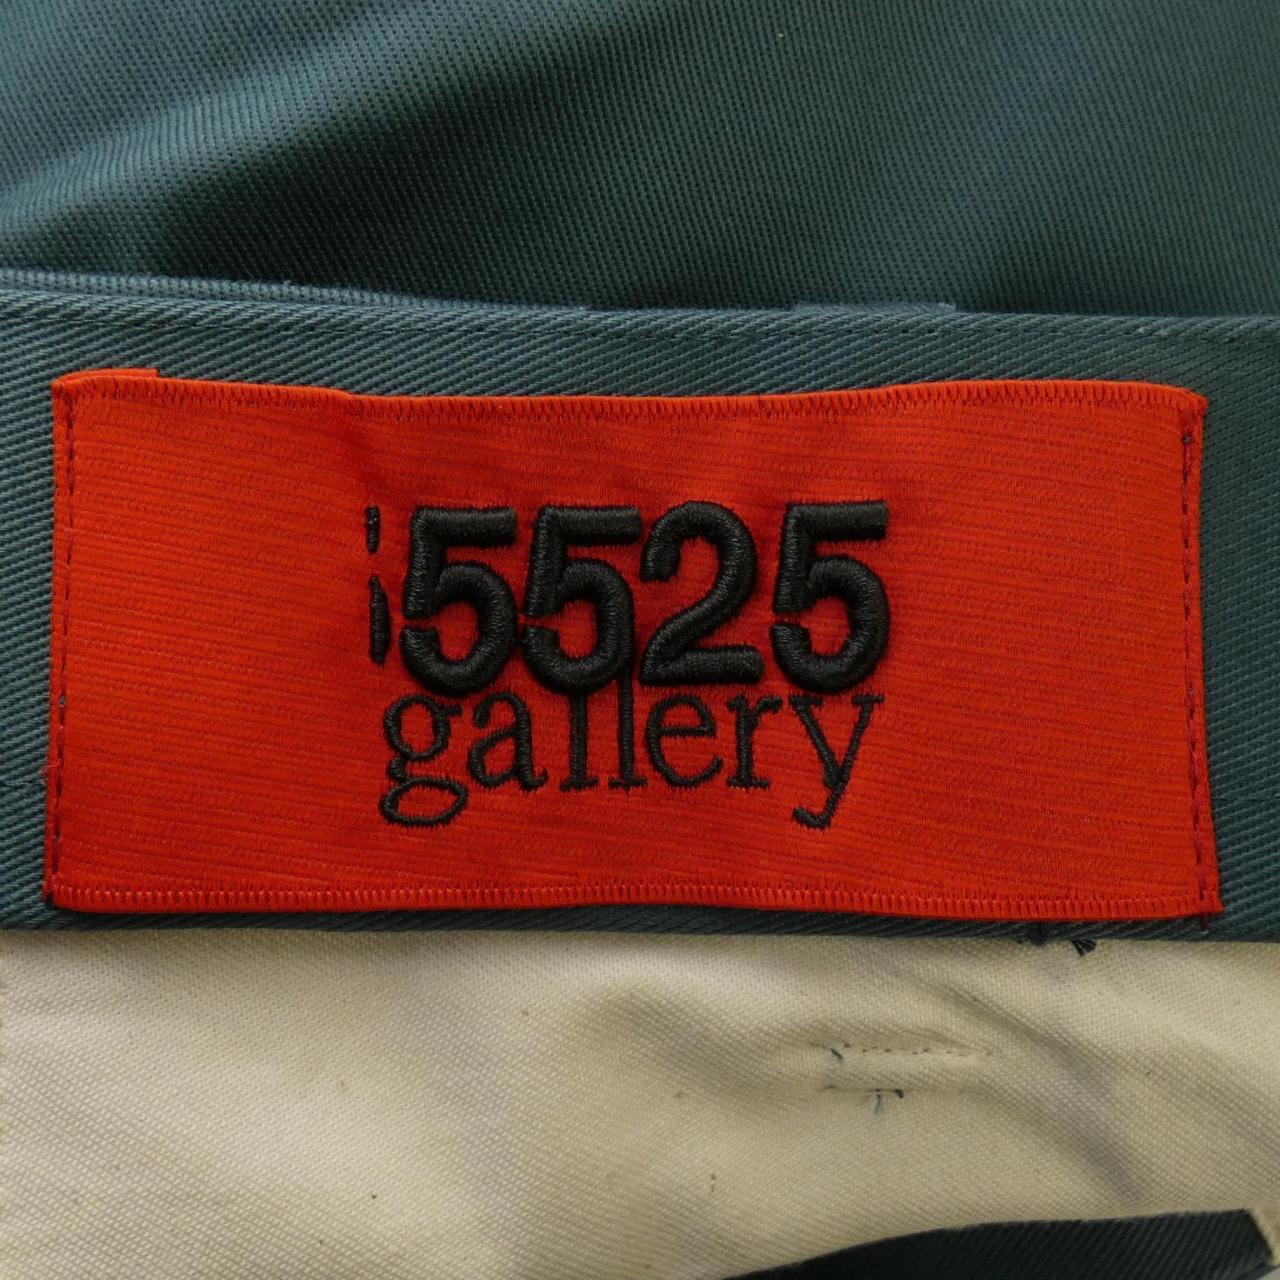 5525GALLERY Shorts